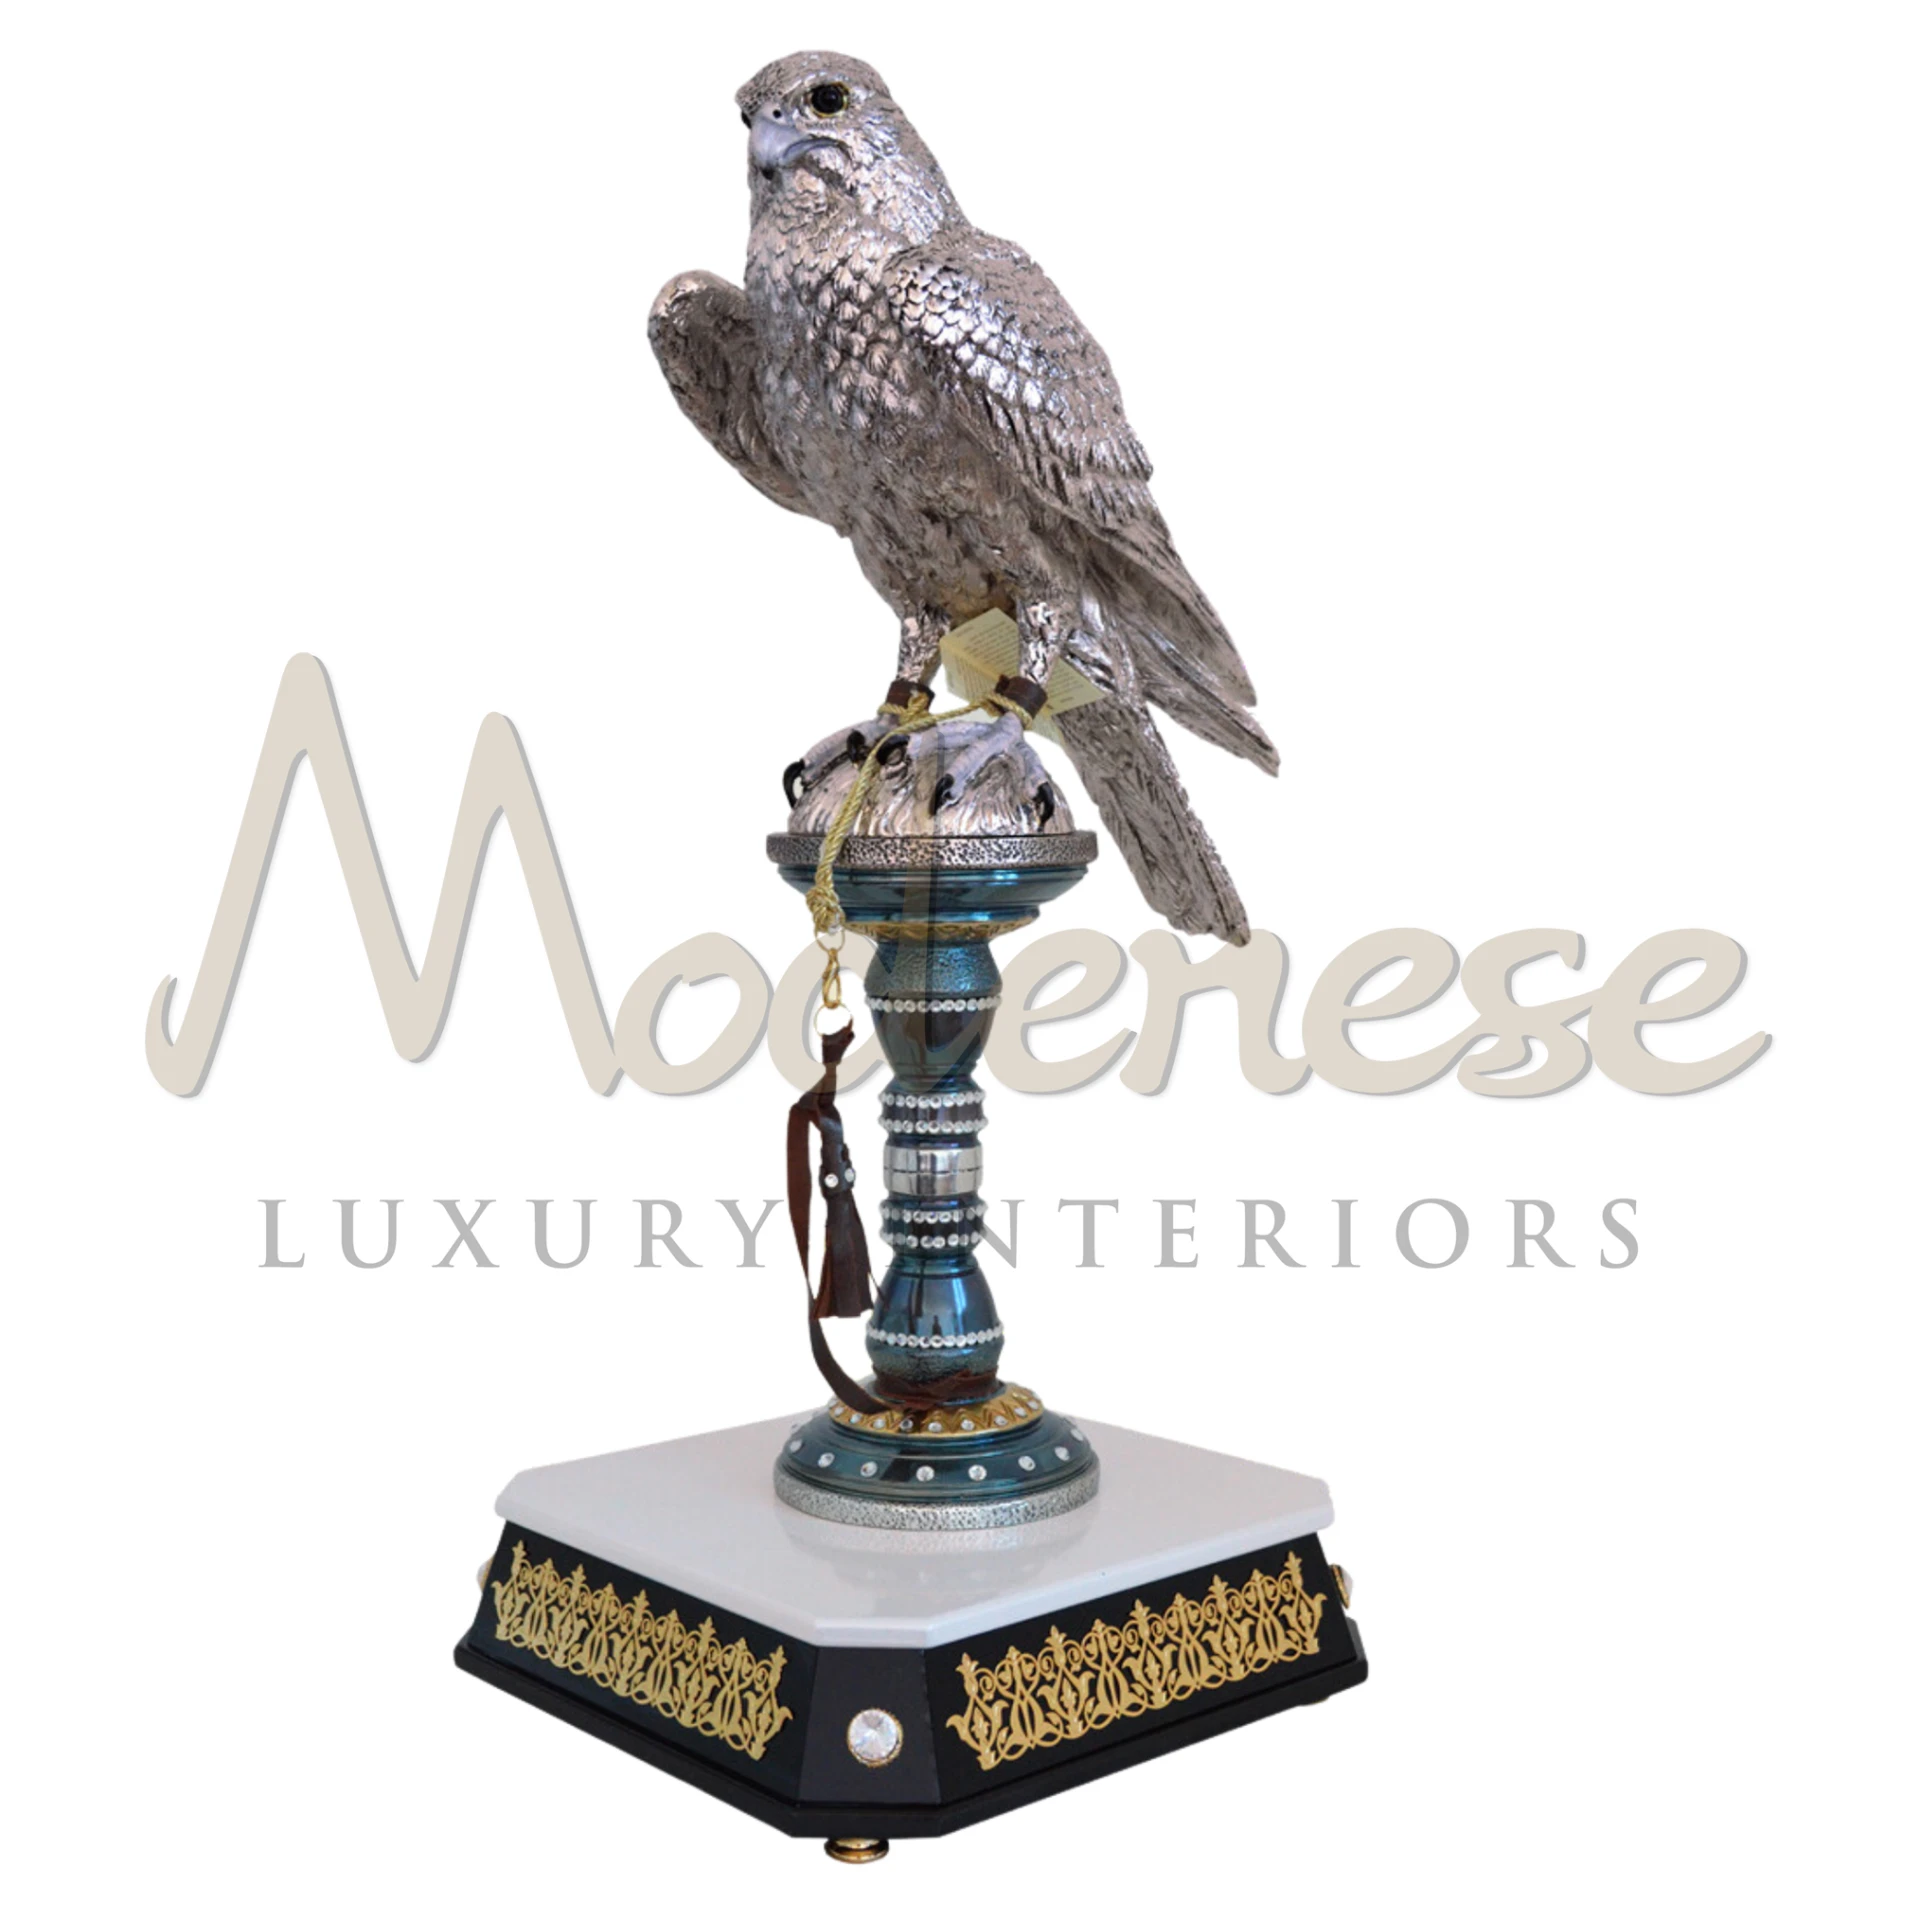 Exquisite Silver Falcon ornament, blending luxury with sophistication in various styles, ideal for enhancing the elegance of home décor settings.